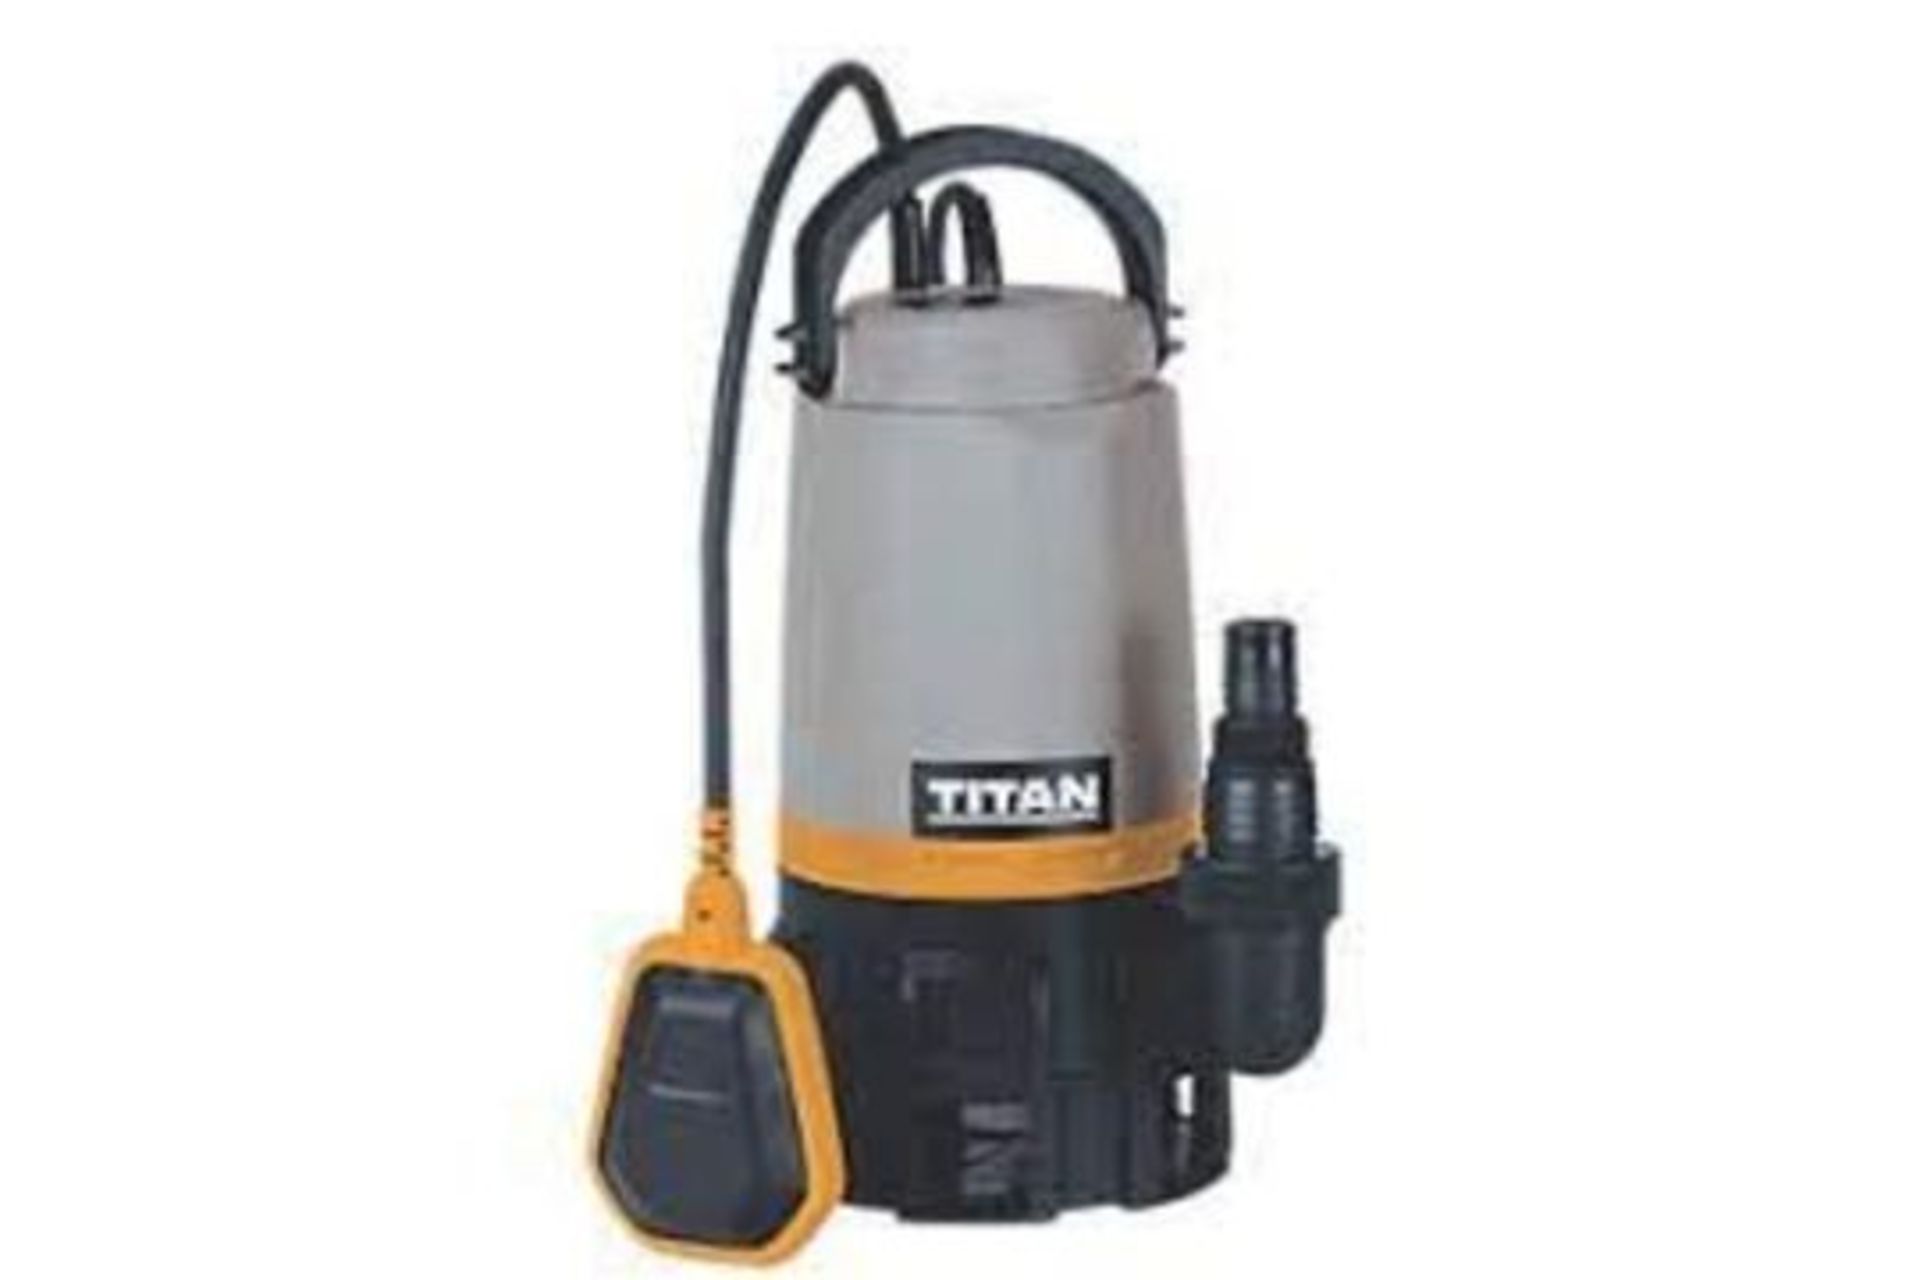 2 x TITAN 750W MAINS-POWERED DIRTY WATER PUMP. - R14.9. Suitable for submersion, quickly clearing